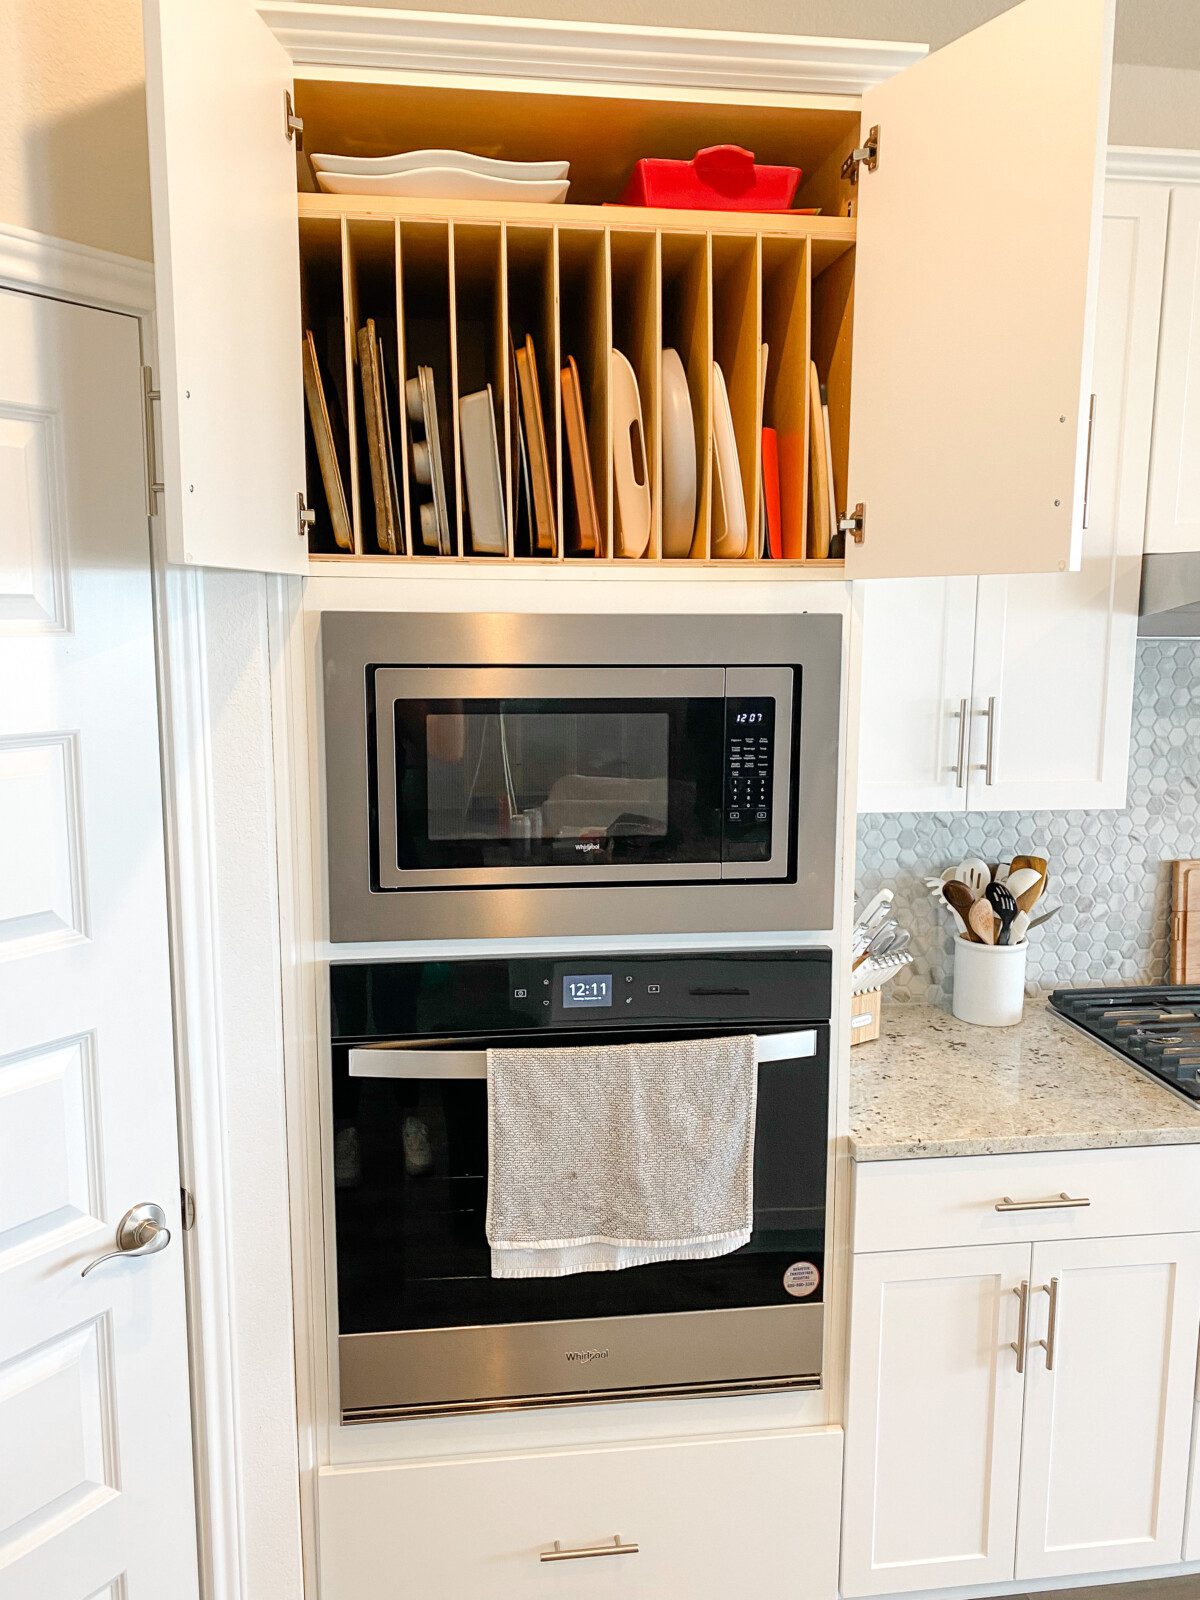 Pantry Oven Cabinet Tray Dividers on The Top Shelf